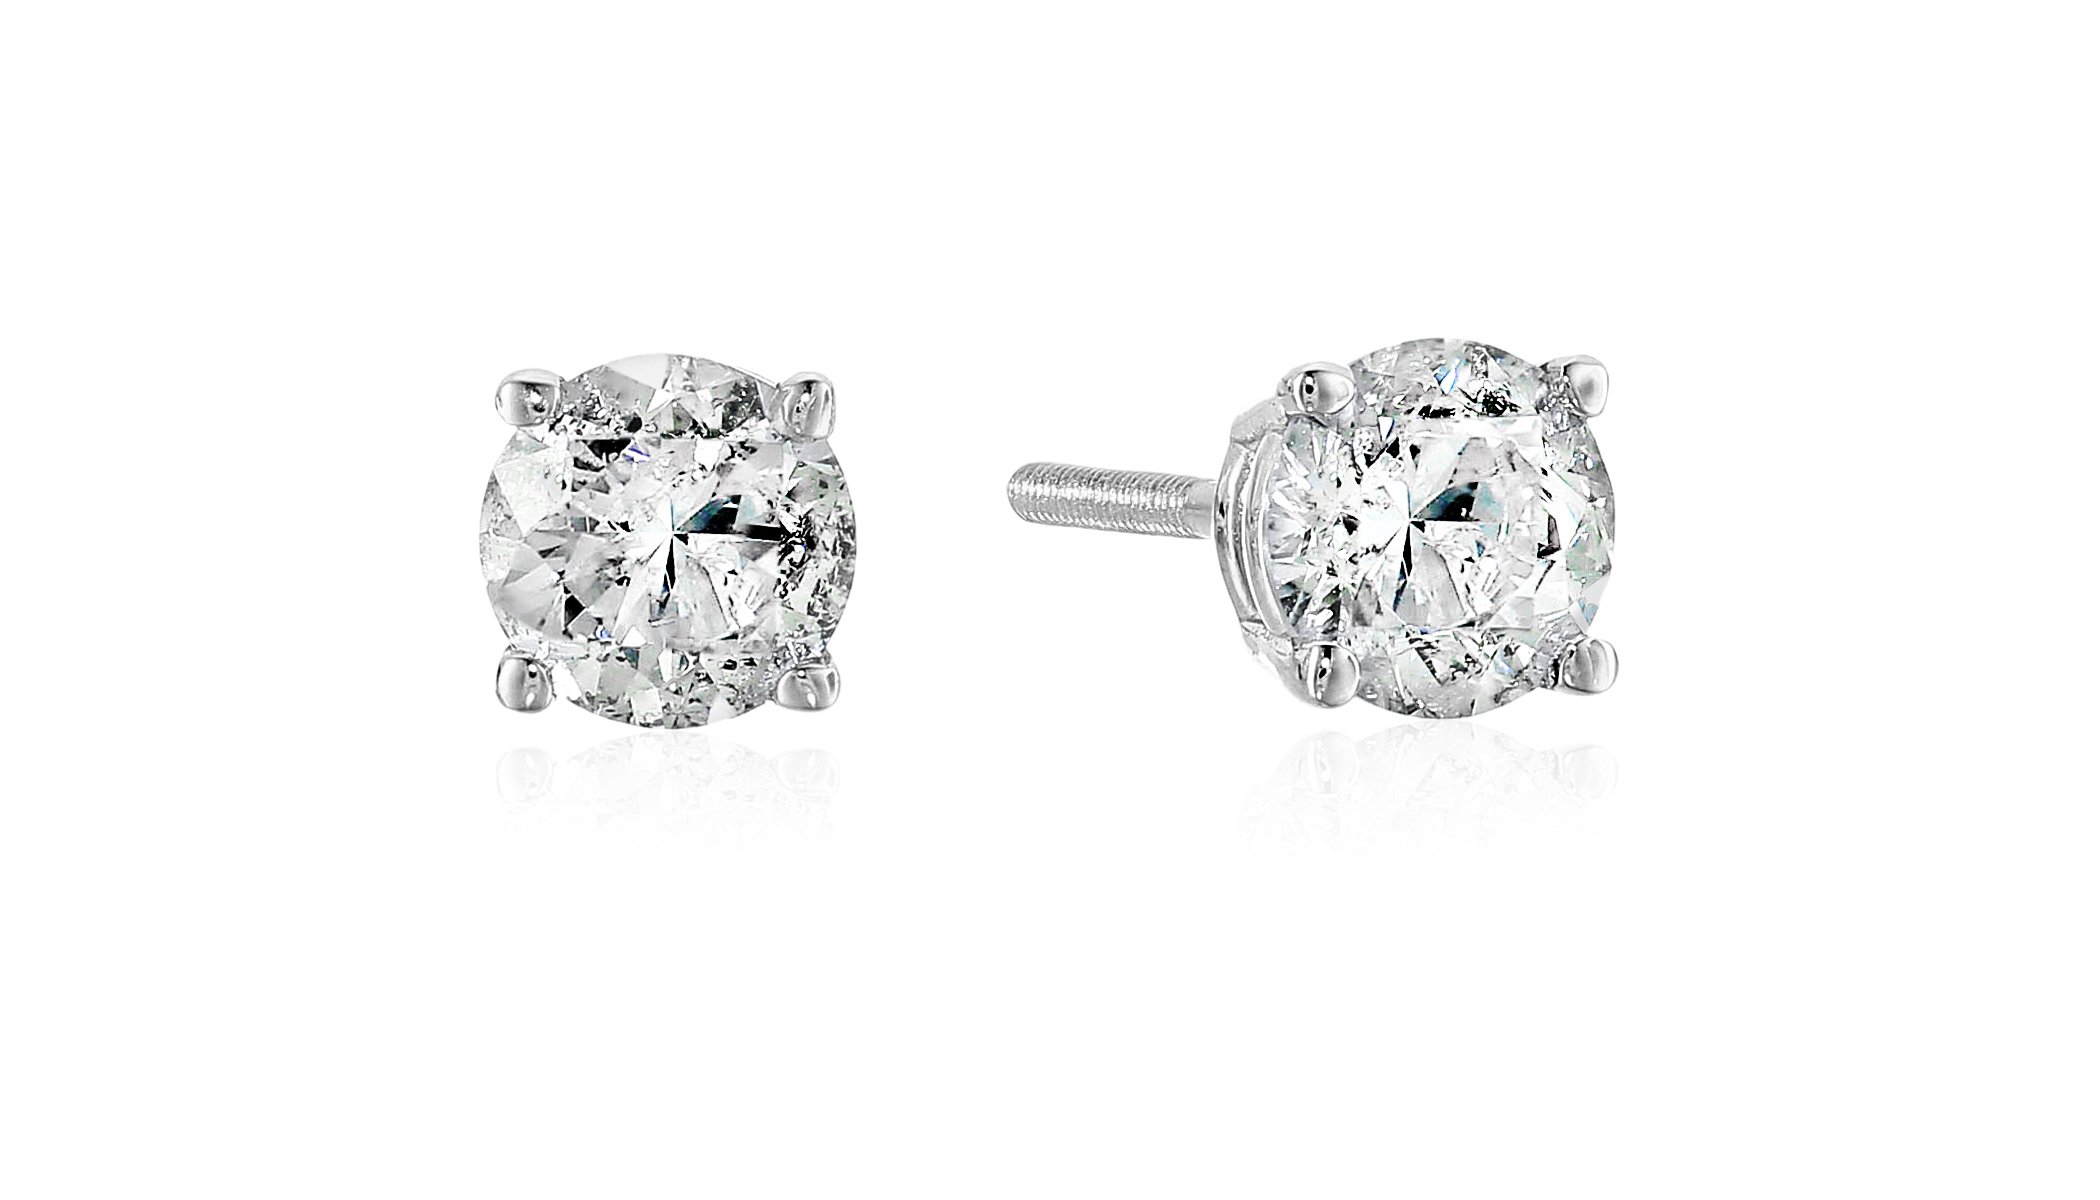 The Diamond Channel Certified Diamond Earrings For Women in 14K Gold with Screw Back and Post Studs (I1-I2 Clarity), Choice of Carat Weights